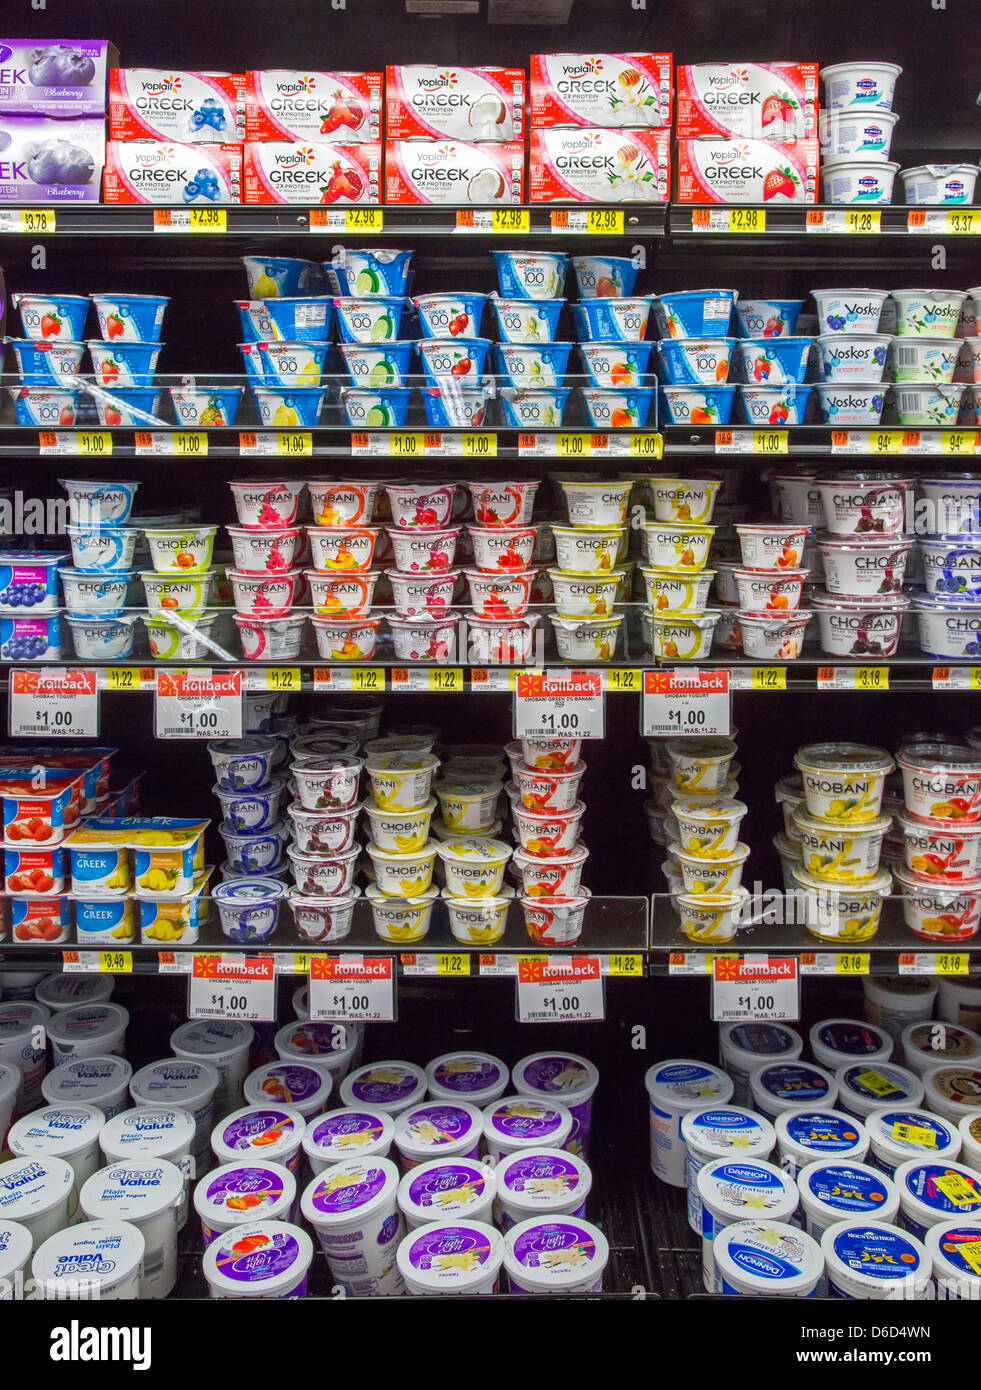 Sterling Heights, Michigan - Greek yogurt on sale in the grocery section of a Walmart store. Stock Photo